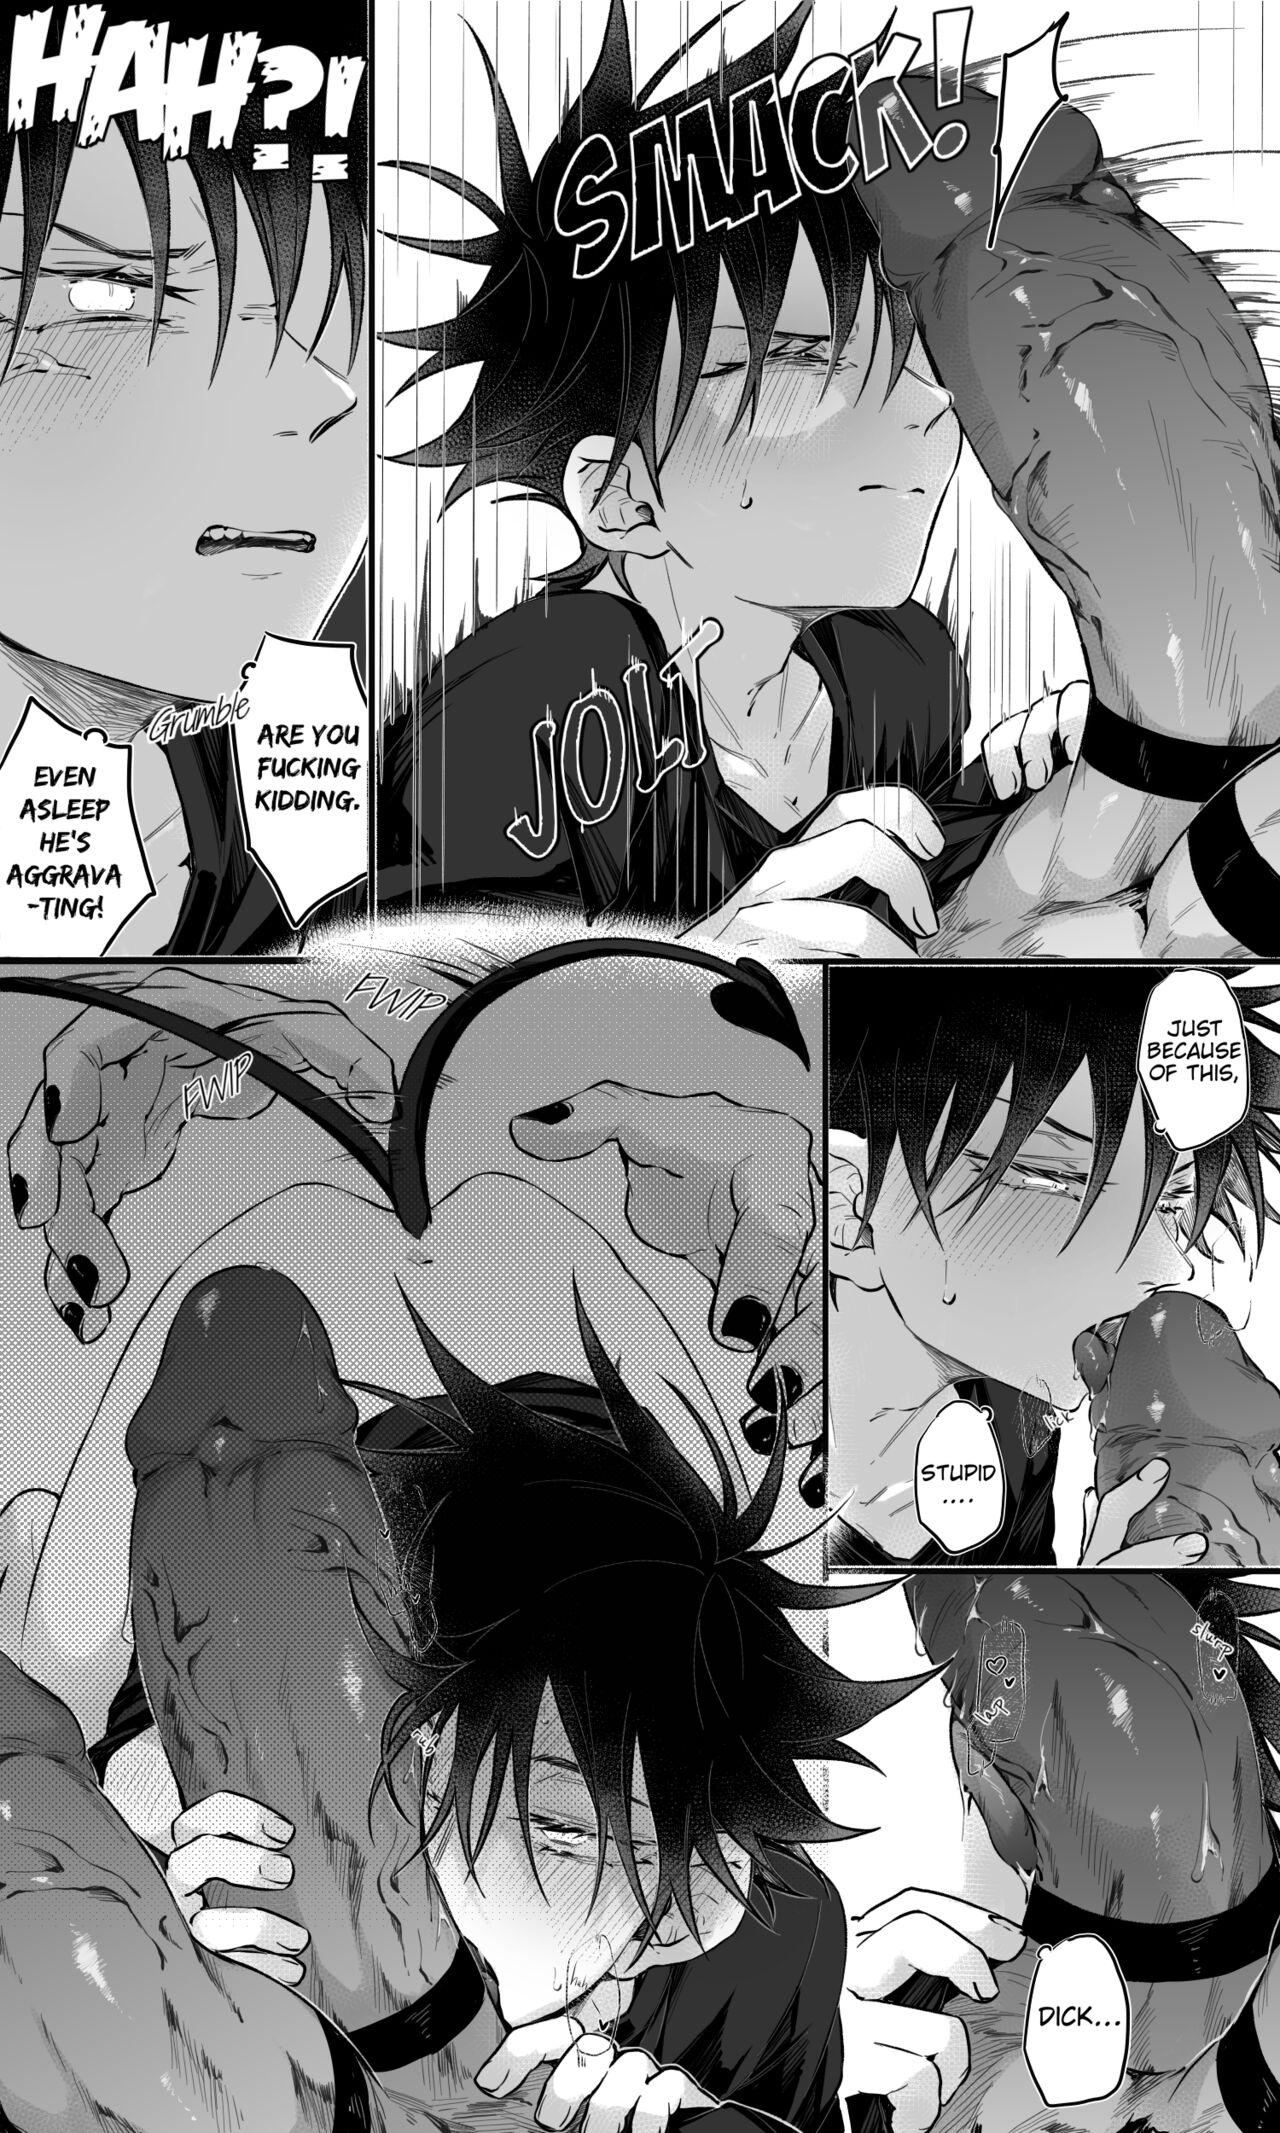 Men OGKuna x Succubus! Megumi for Strad in the skfsit SS event - Jujutsu kaisen Girlongirl - Page 2